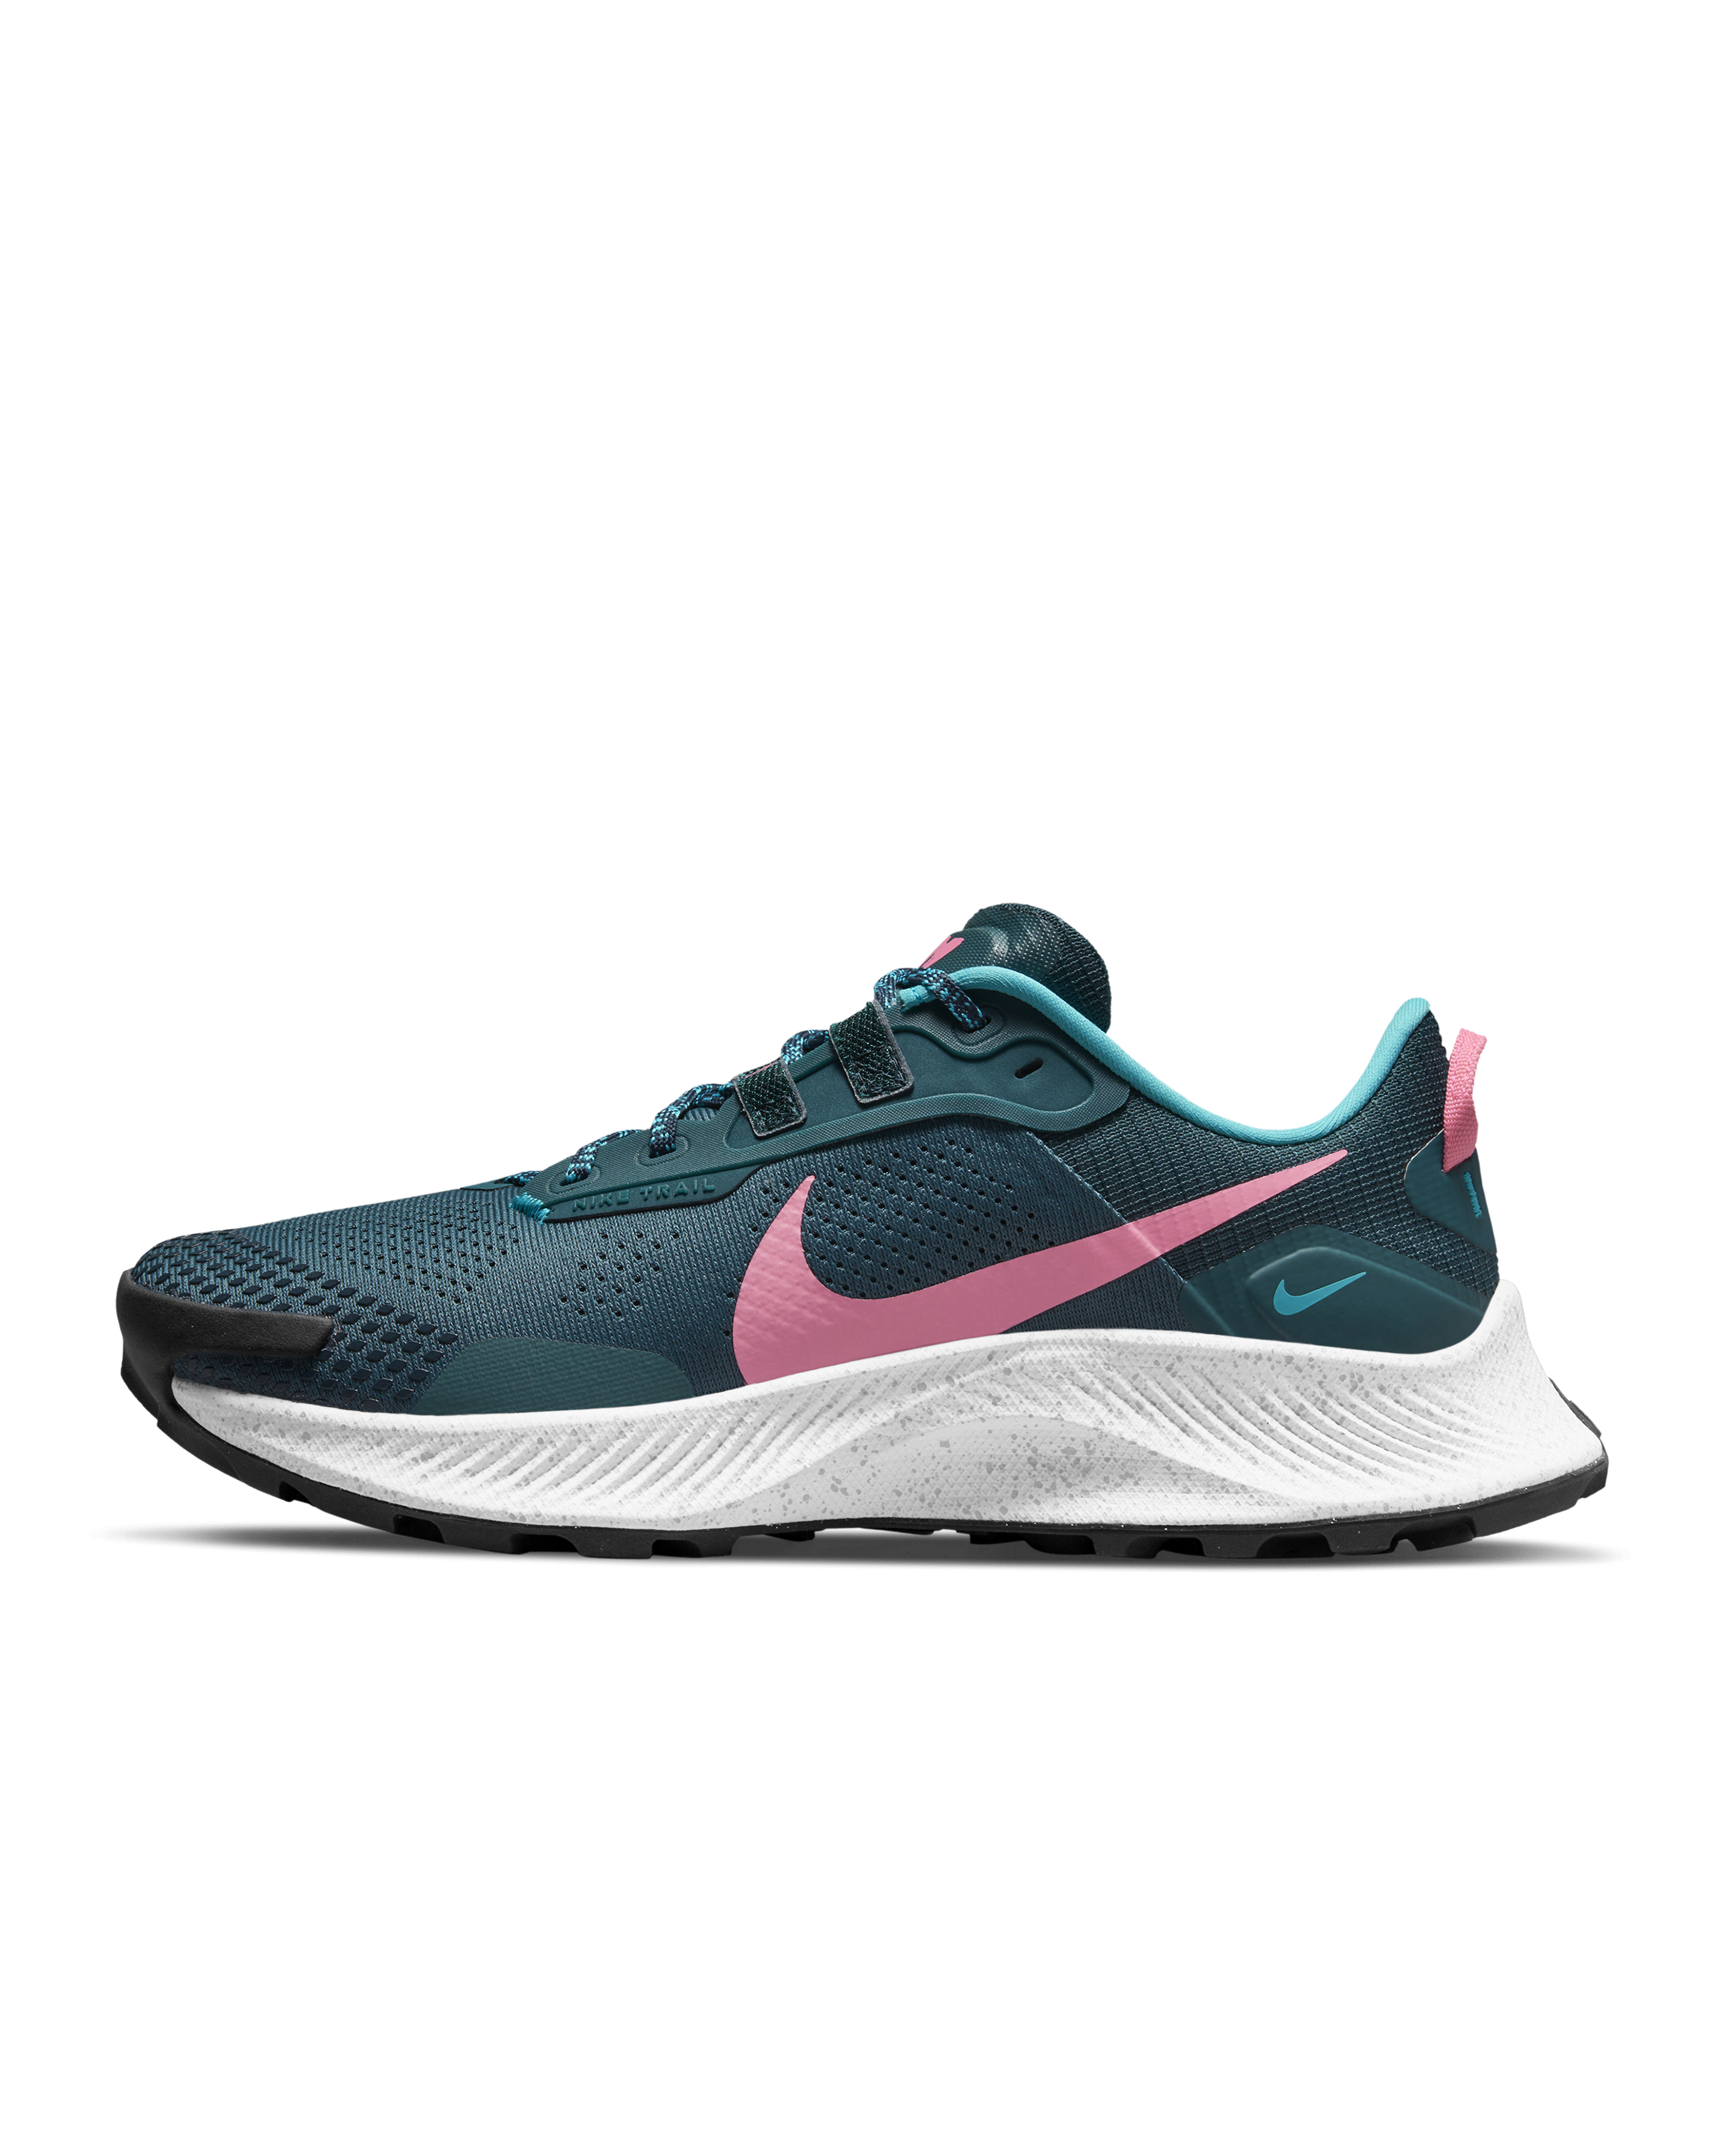 Start nike trail women's Your Summer Hiking On The Right Foot With Nike's Trail Sneakers